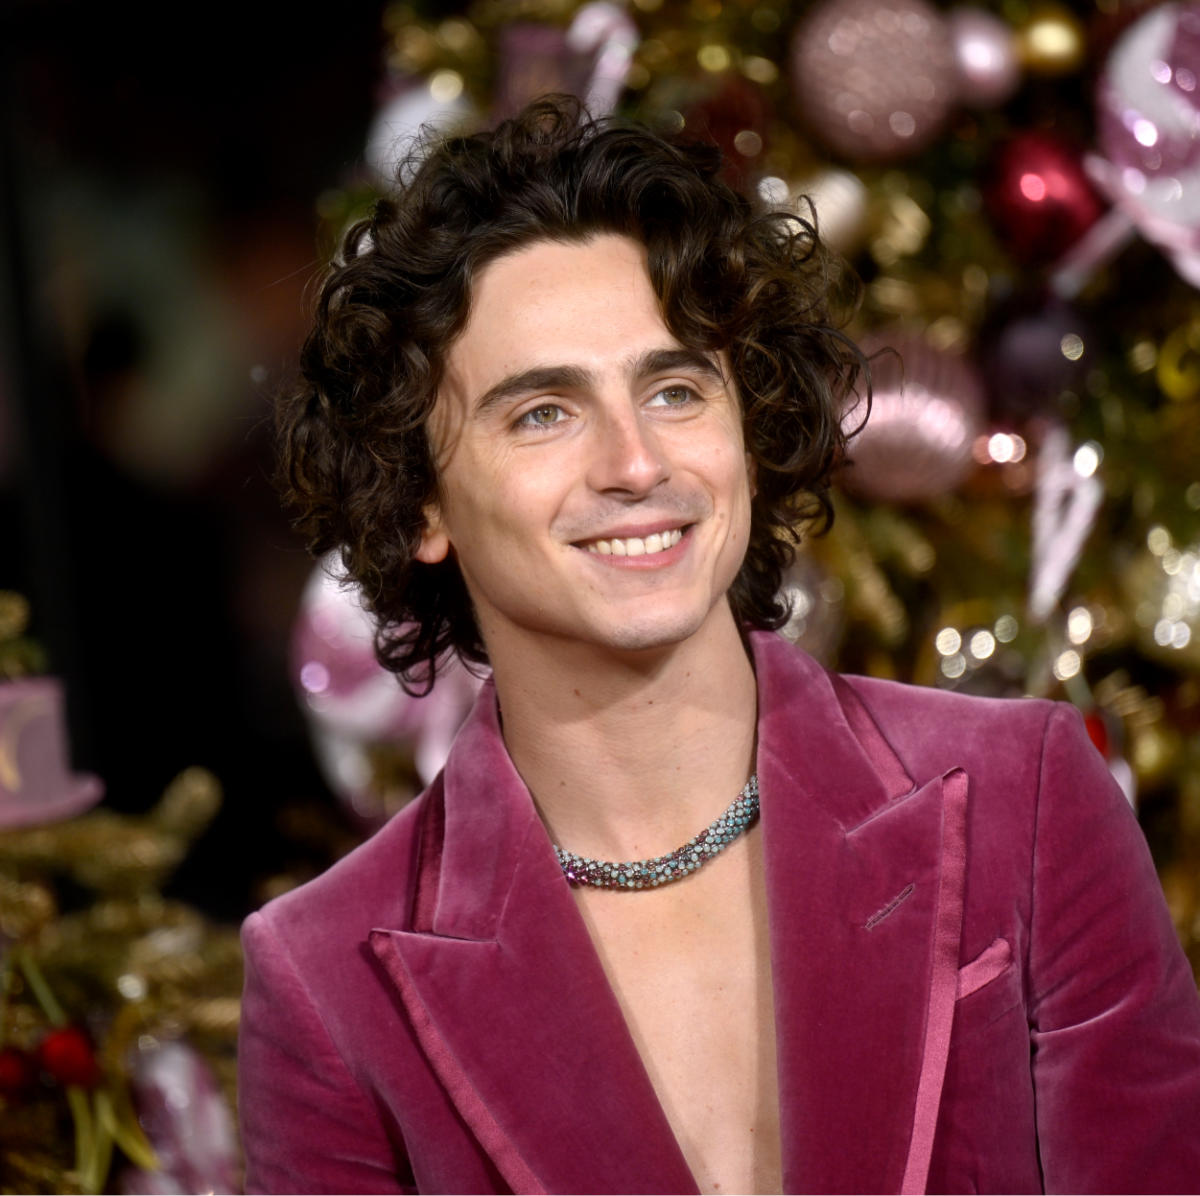 Timothee Chalamet wearing a purple suit and candy-inspired Cartier necklace